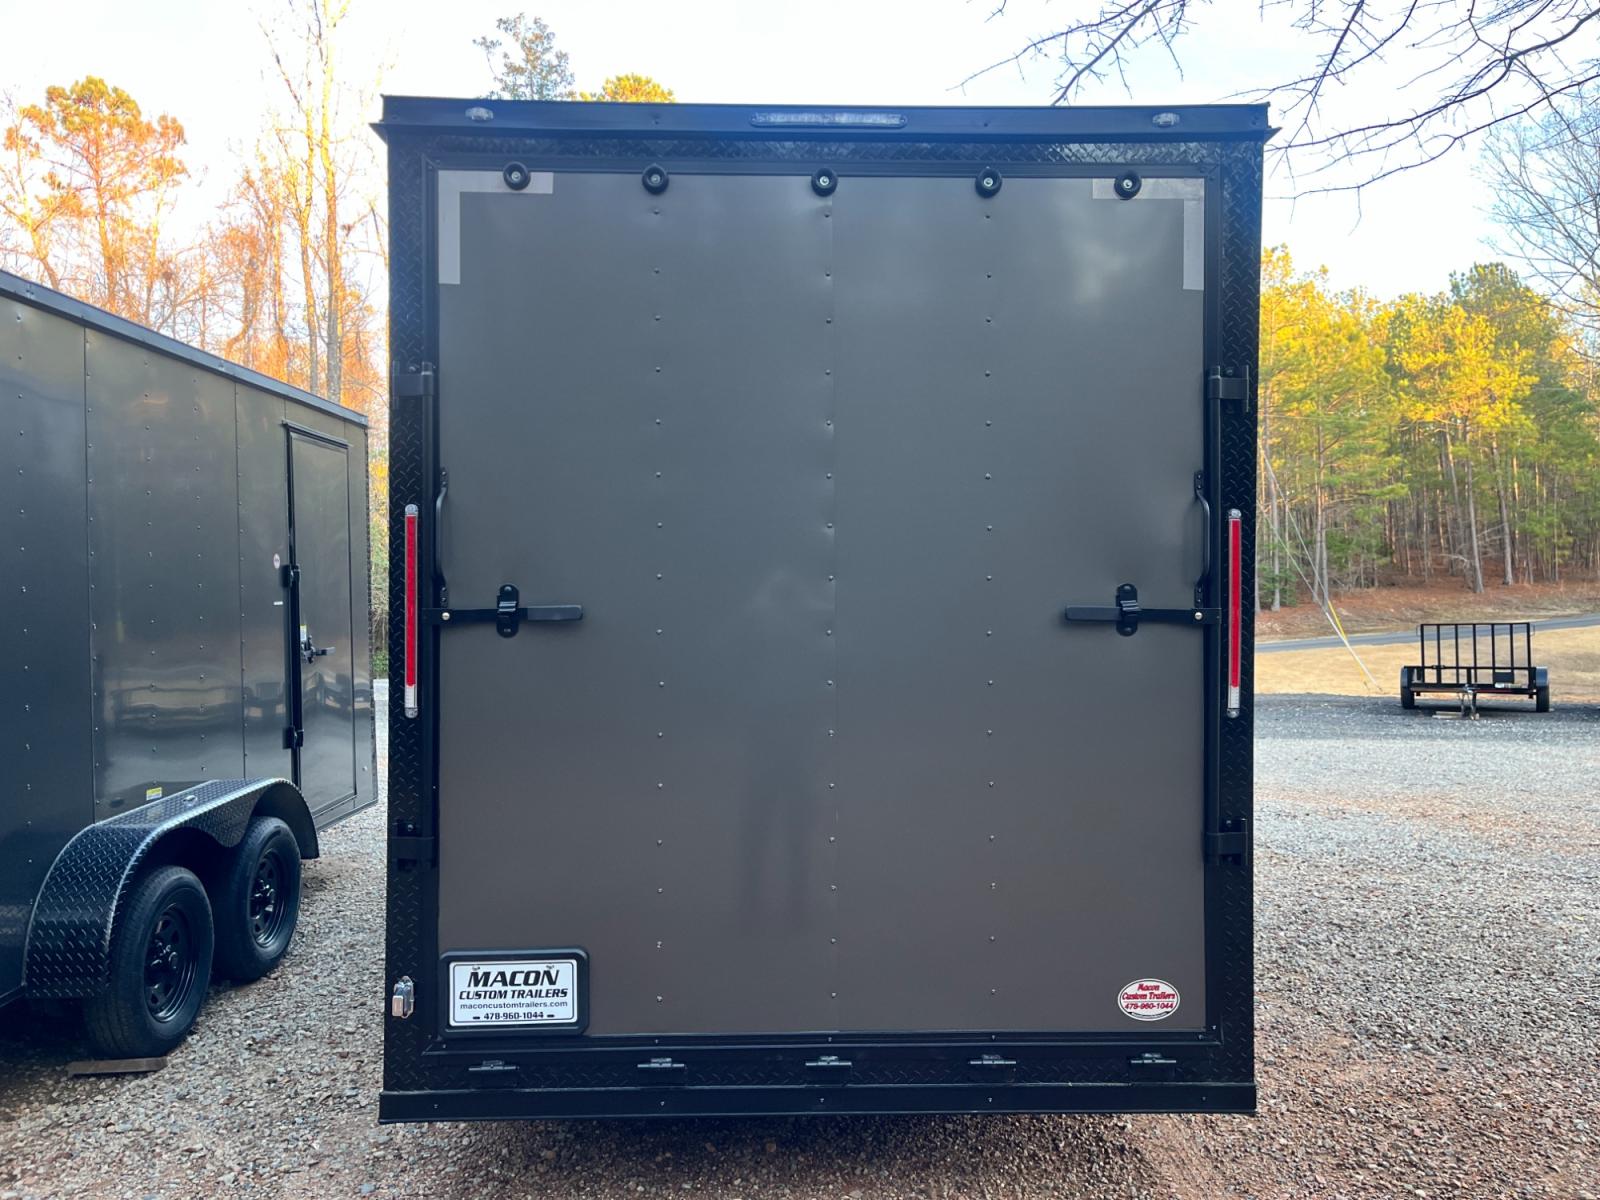 2023 .080 Charcoal Metallic w/Black Out Pkg. Elite Cargo 7ft X 14ft Tandem , located at 1330 Rainey Rd., Macon, 31220, (478) 960-1044, 32.845638, -83.778687 - Brand New 2023 "Top of the Line" Elite Cargo Brand Trailer Made in South Ga. Awesome 7ft X 14ft Tandem Enclosed Cycle Hauler & Cargo Trailer! Taller Inside Height is 7ft 6" Tall Inside & Ramp Door Clearance is 7ft! .080 Thick Metallic Charcoal Aluminum Skin is Awesome! Black Out Pkg Trim, Wider - Photo #3